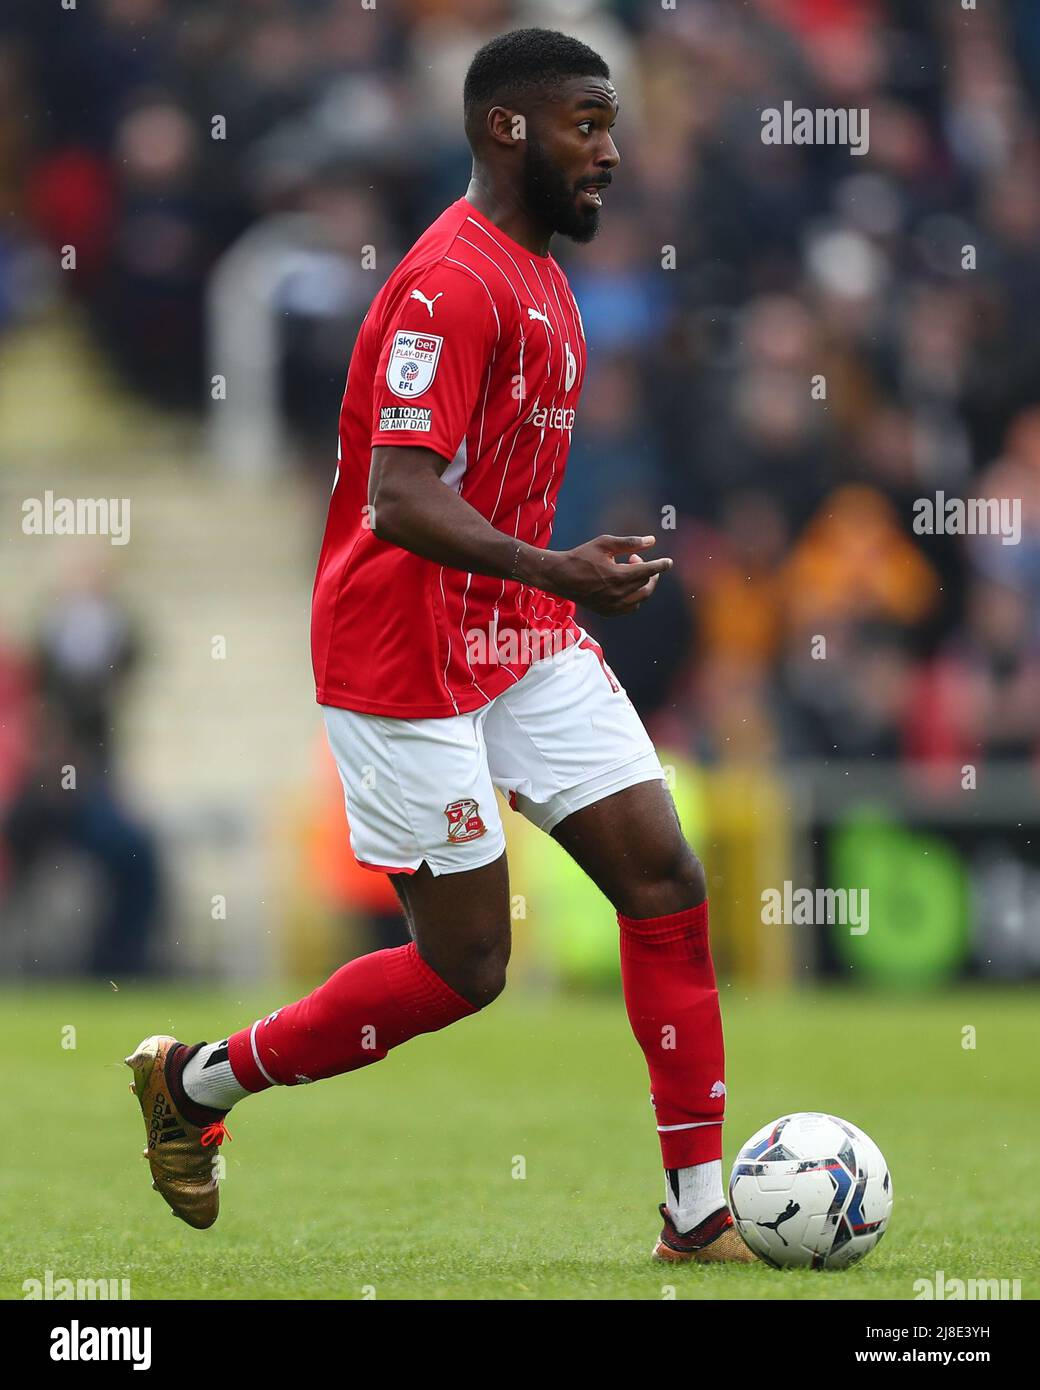 SWINDON, UK. MAY 15TH Mandela Egbo of Swindon Town pictured with the ball during the Sky Bet League 2 Play-Off Semi-Final 1st Leg between Swindon Town and Port Vale at the County Ground, Swindon on Sunday 15th May 2022. (Credit: Kieran Riley | MI News) Credit: MI News & Sport /Alamy Live News Stock Photo